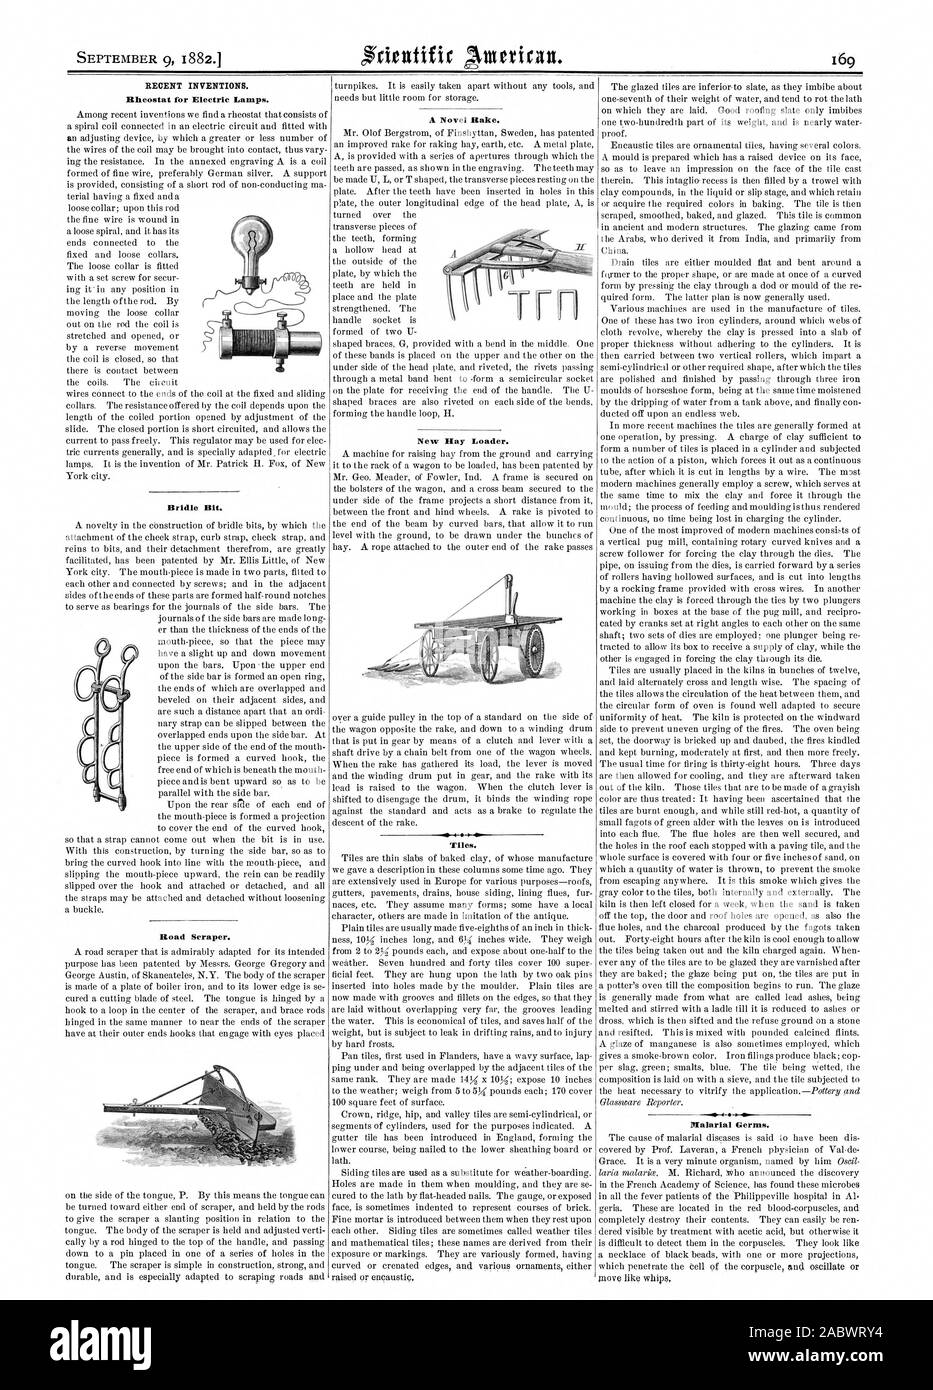 Road Scraper. RECENT INVENTIONS. Rheostat for Electric Lamps. Bridle Bit. A Novel Rake. New Bay Loader. Tiles. Malarial Germs., scientific american, 82-09-09 Stock Photo